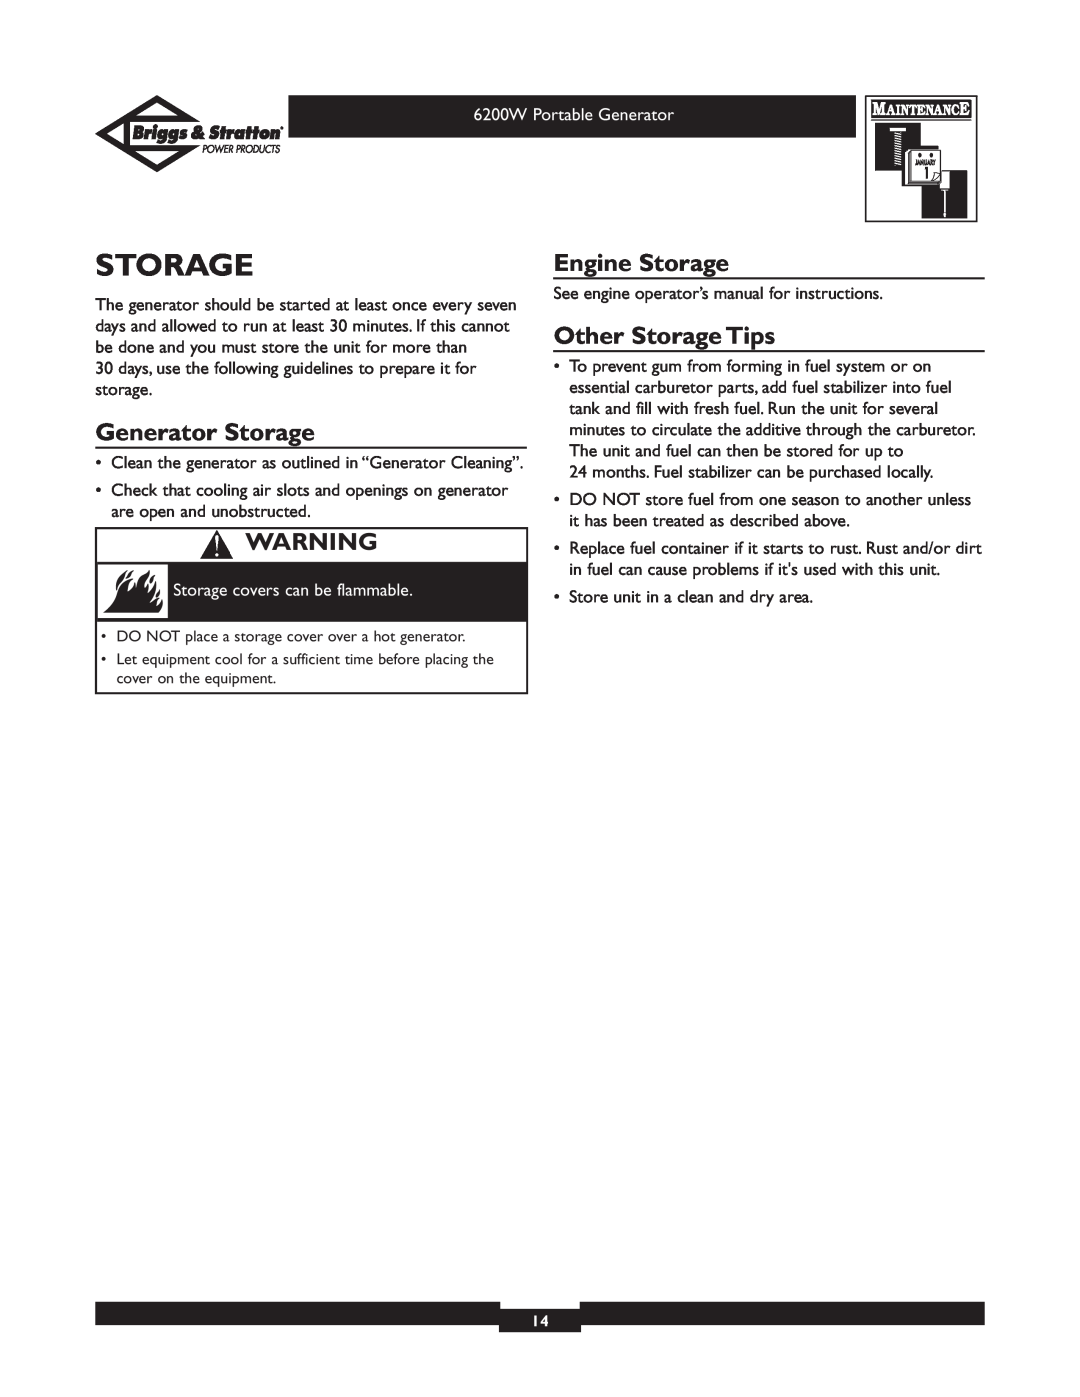 Briggs & Stratton 30211 Generator Storage, Engine Storage, Other Storage Tips, Storage covers can be flammable 